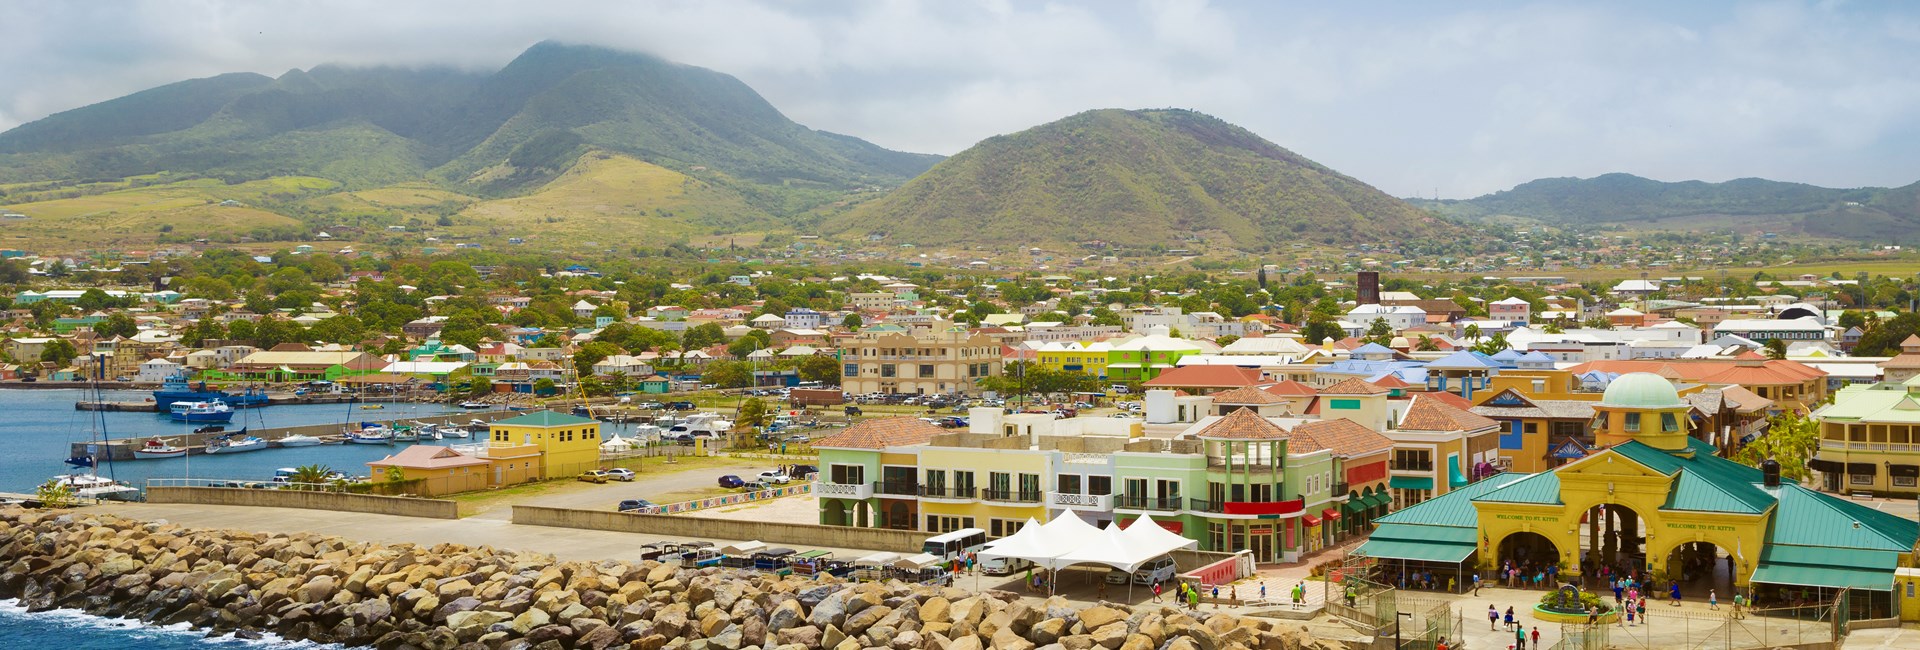 Colourful buildings at a port in a Caribbean town with green hills in the background 